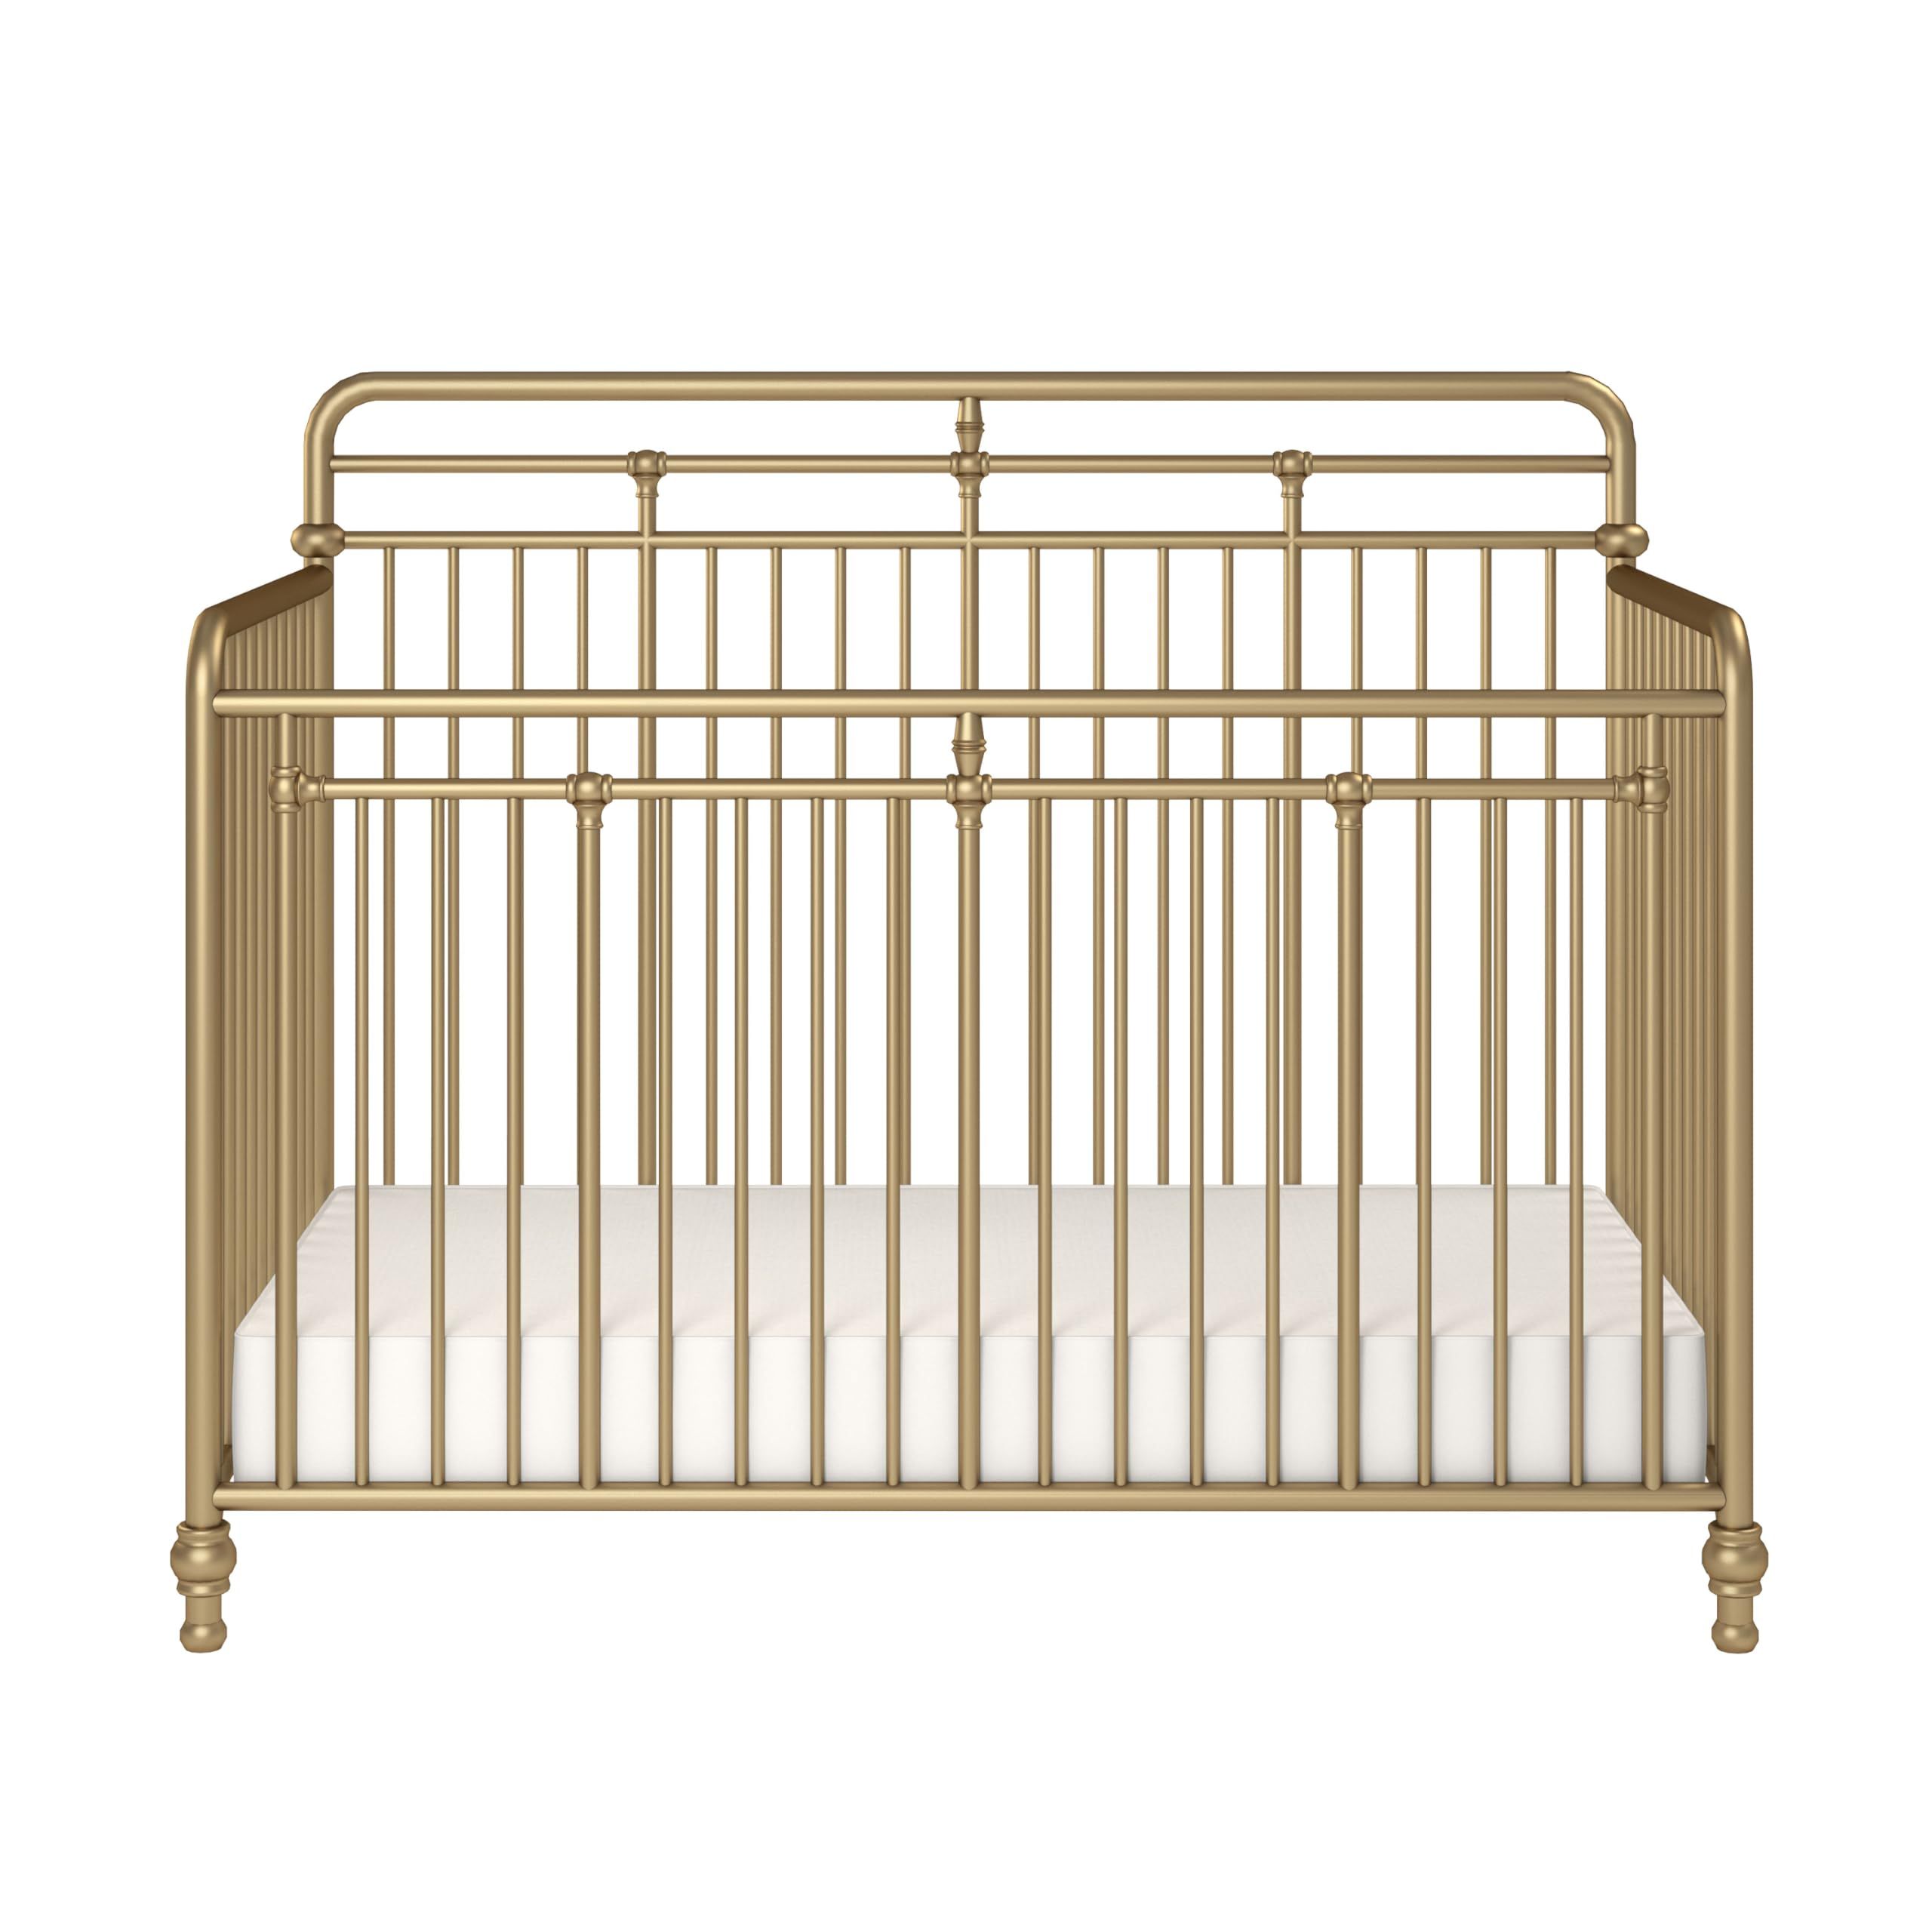 Little Seeds Monarch Hill Hawken 3 in 1 Convertible Metal Crib, Gold | Amazon (US)